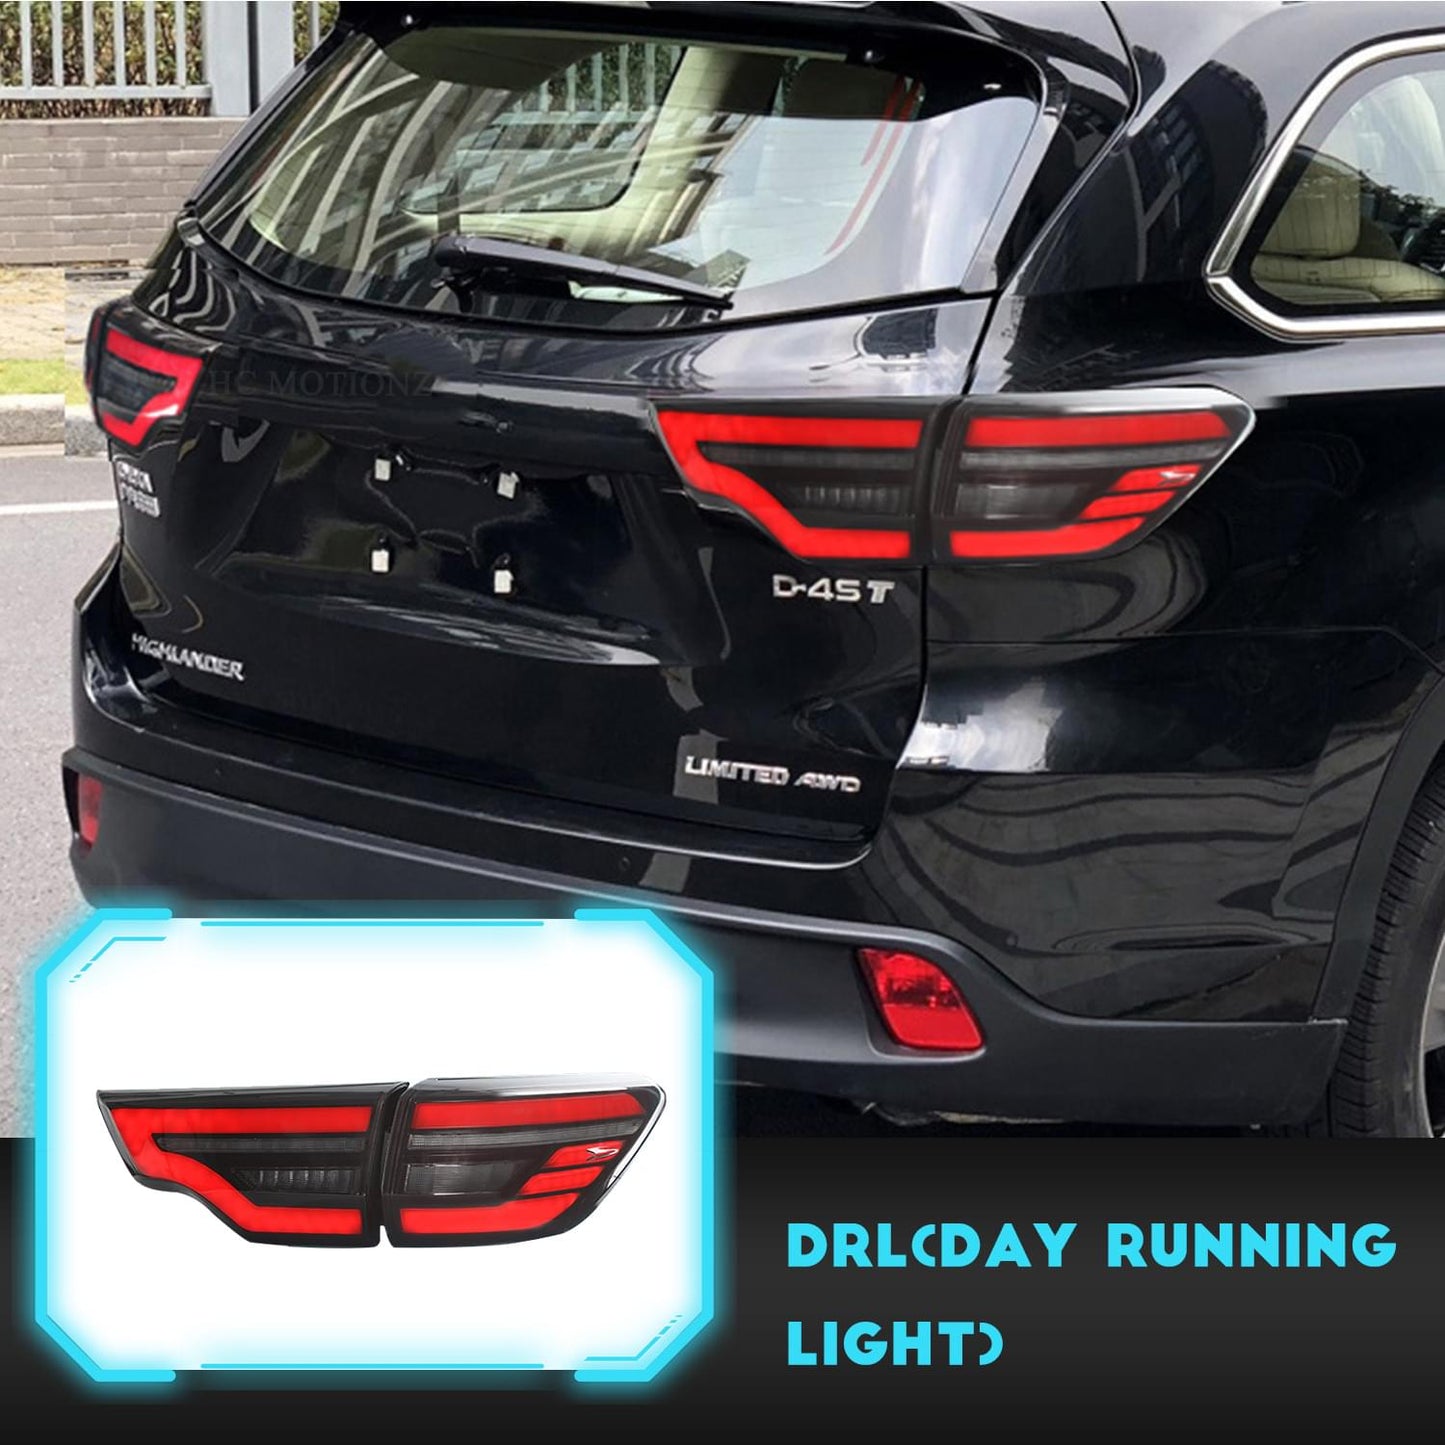 HCMOTION Taillights Fit/For Toyota Highlander 2014-2019